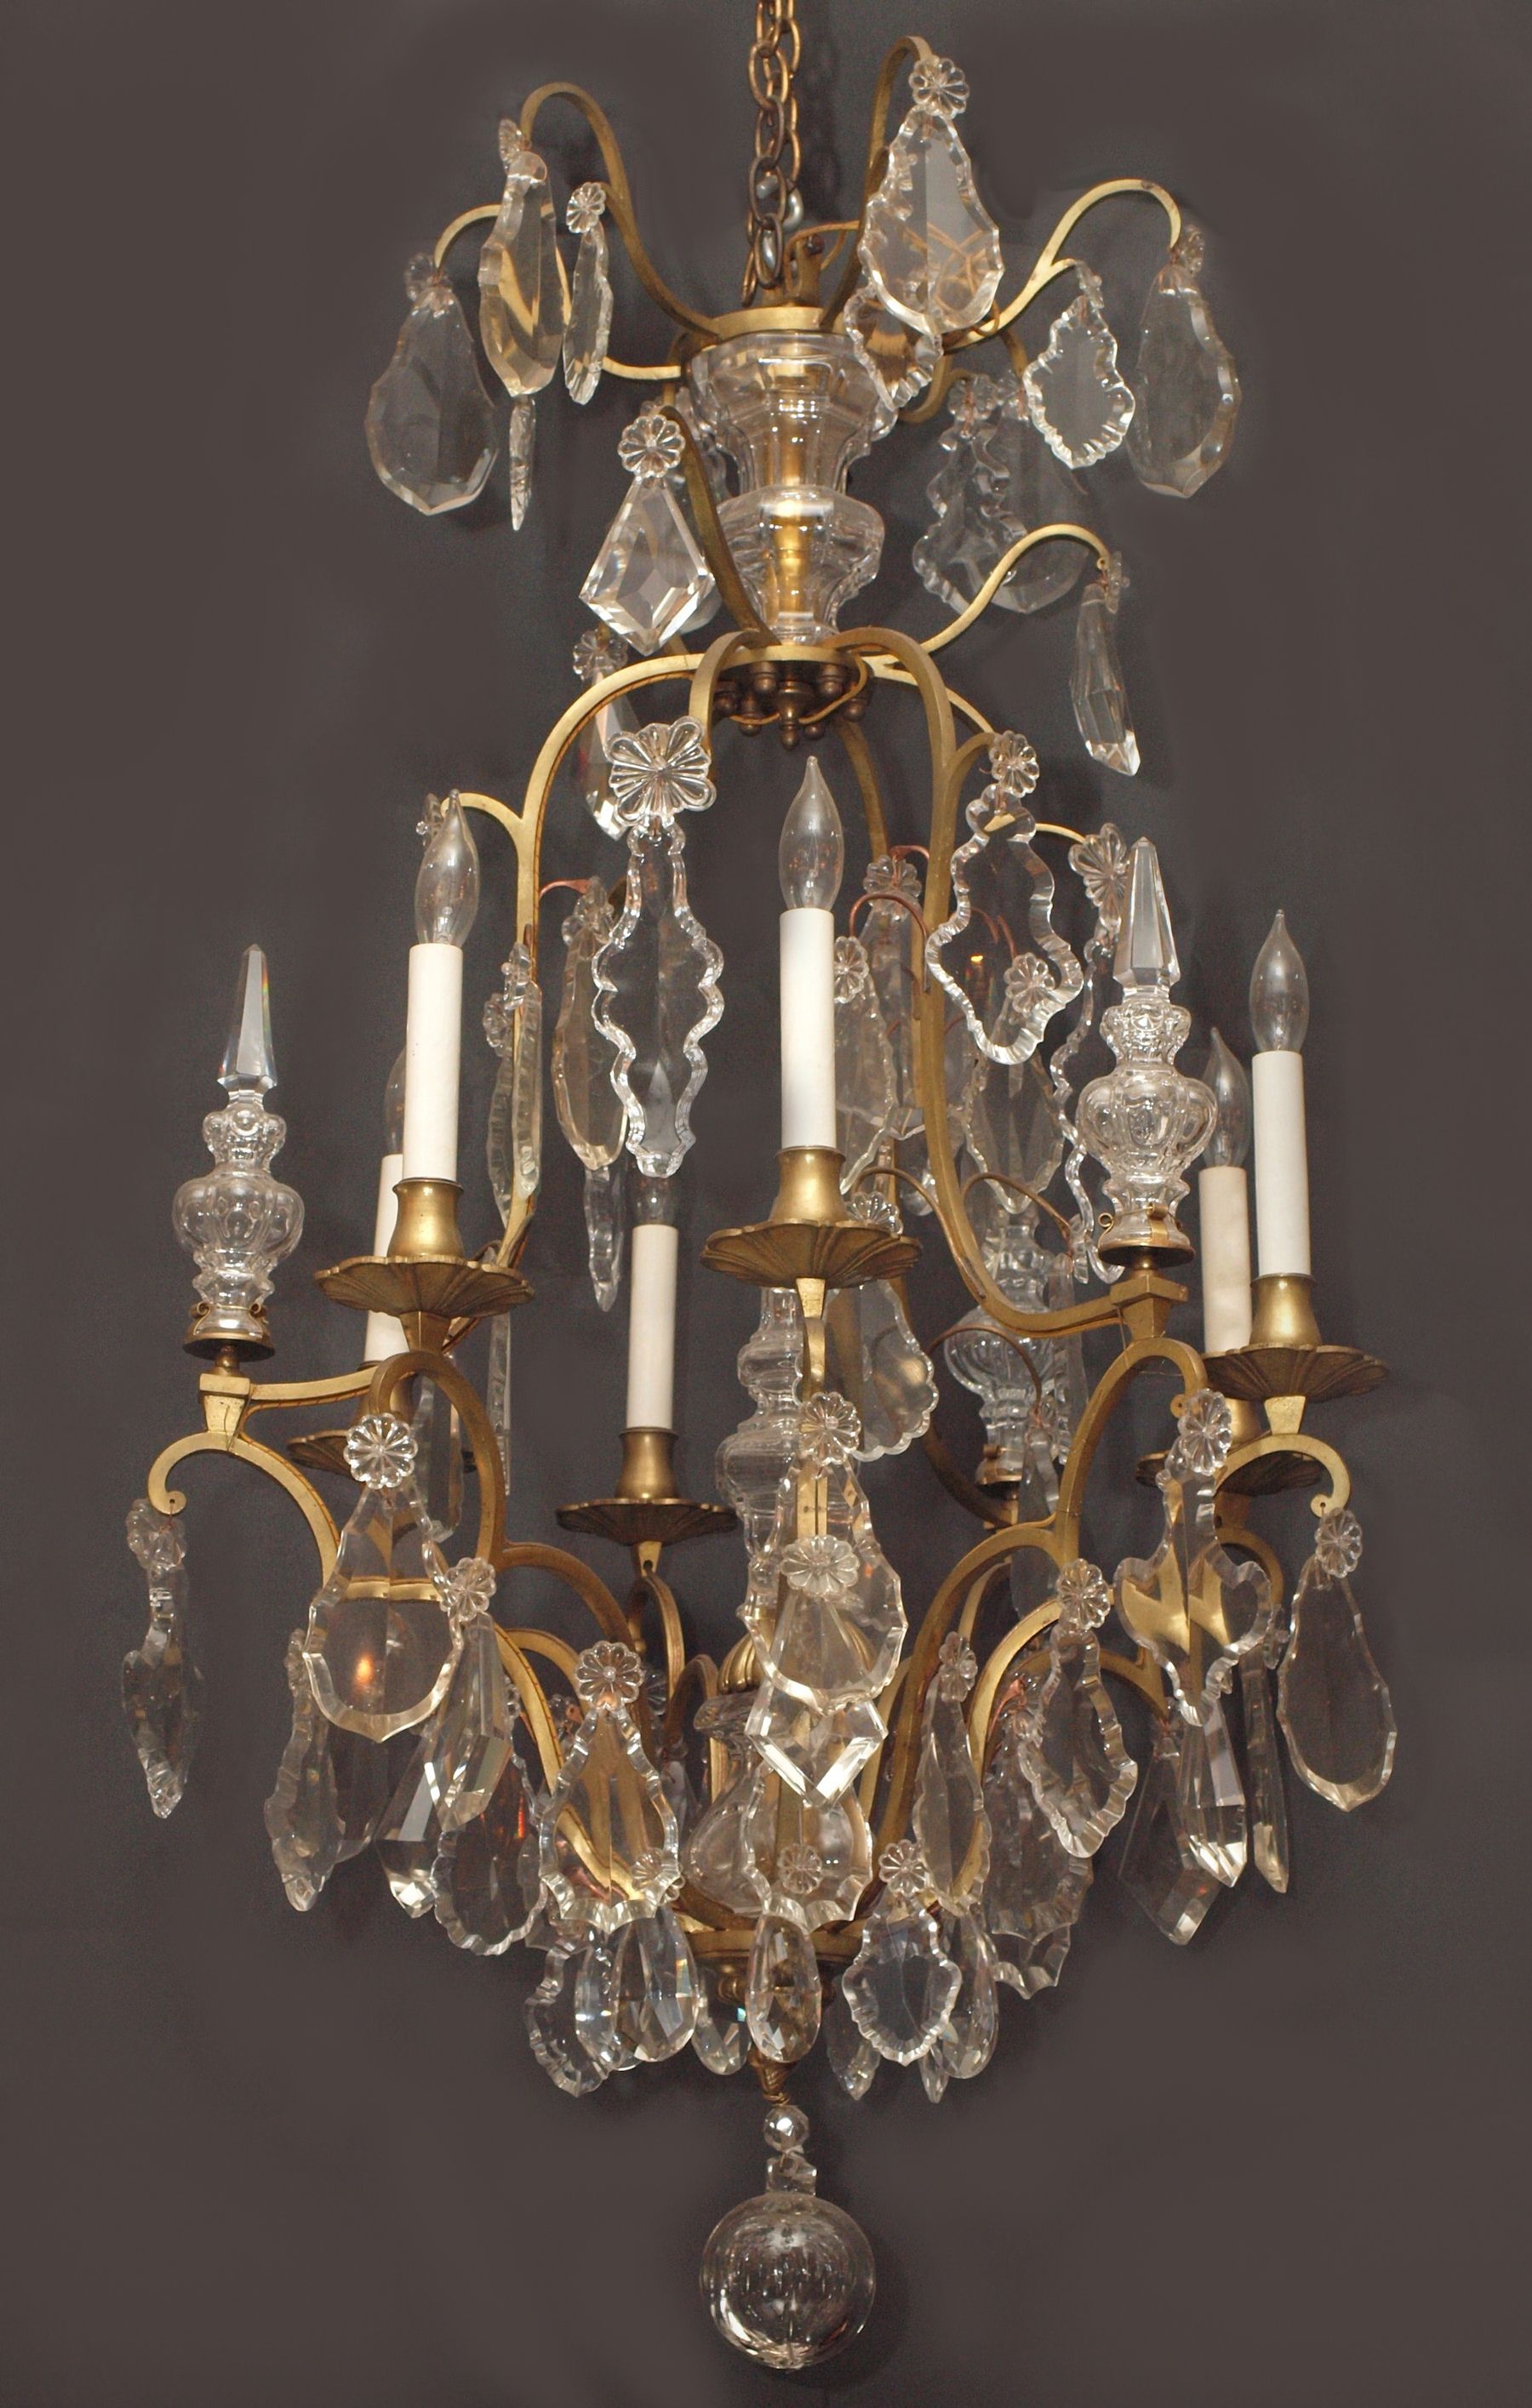 Antiques Classifieds Antiques Antique Lamps And Lighting Throughout Antique French Chandeliers (View 11 of 12)